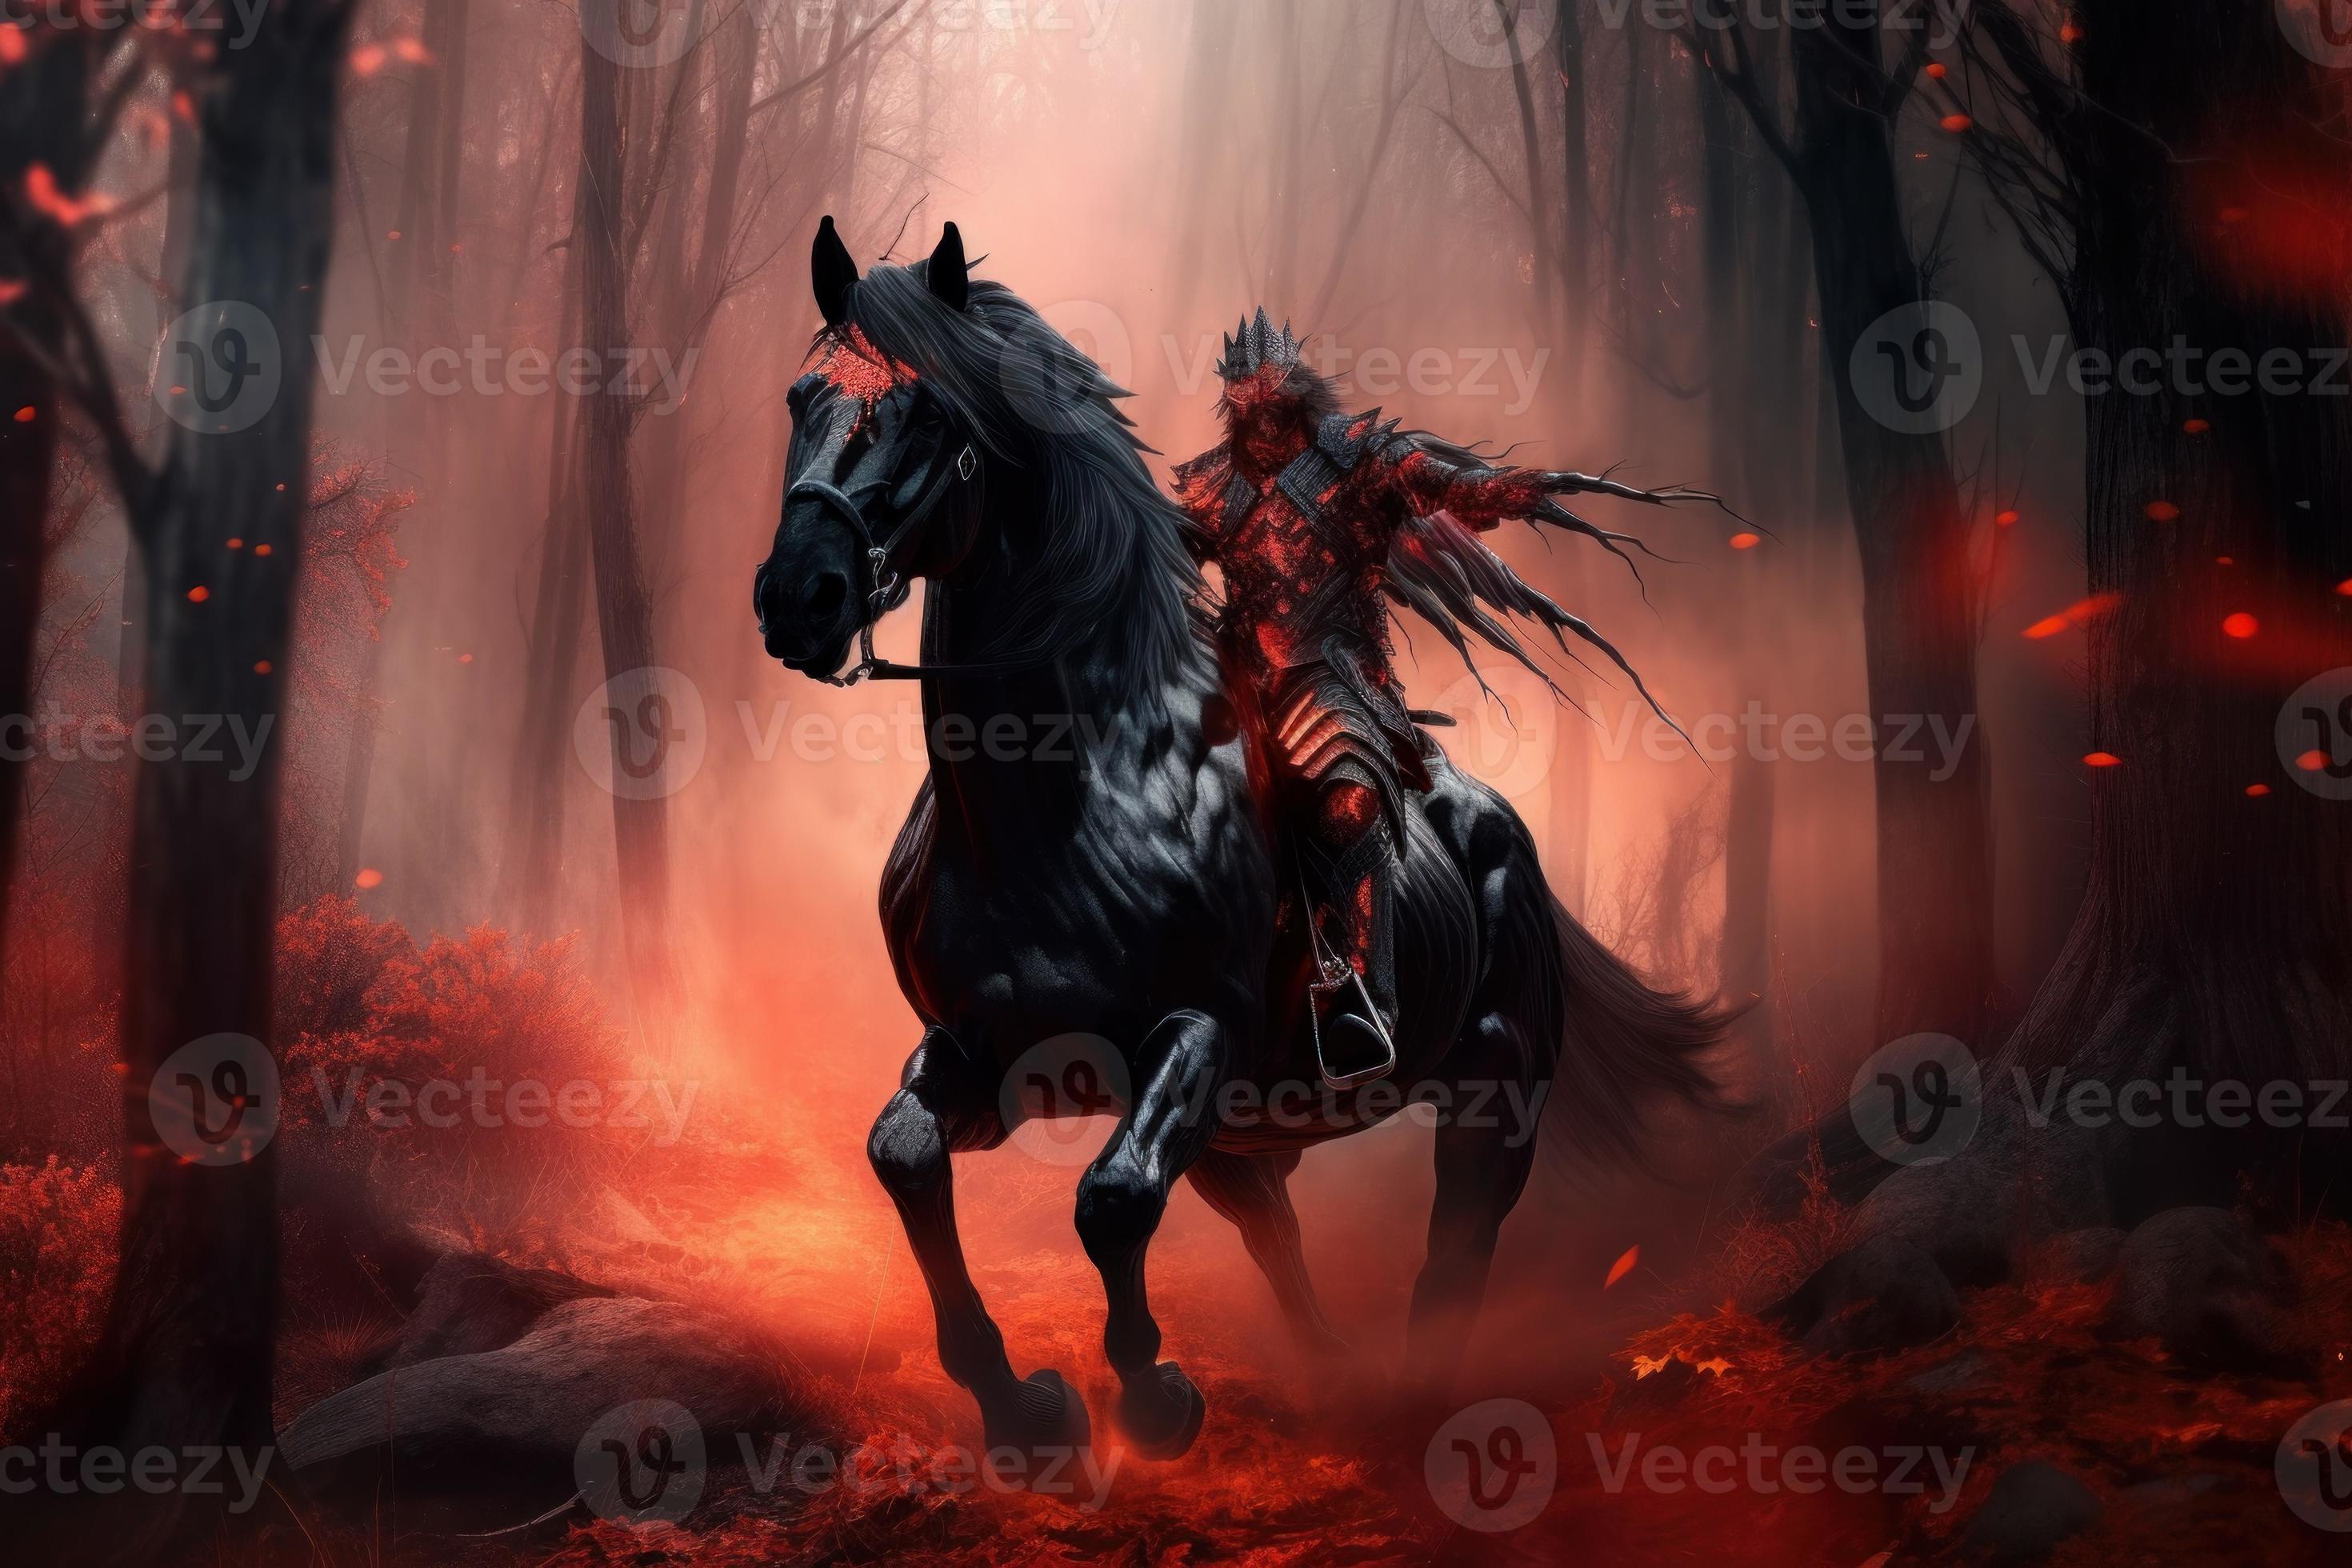 https://static.vecteezy.com/system/resources/previews/022/392/950/large_2x/demon-horse-in-fog-forest-magic-dark-rider-generate-ai-photo.jpg